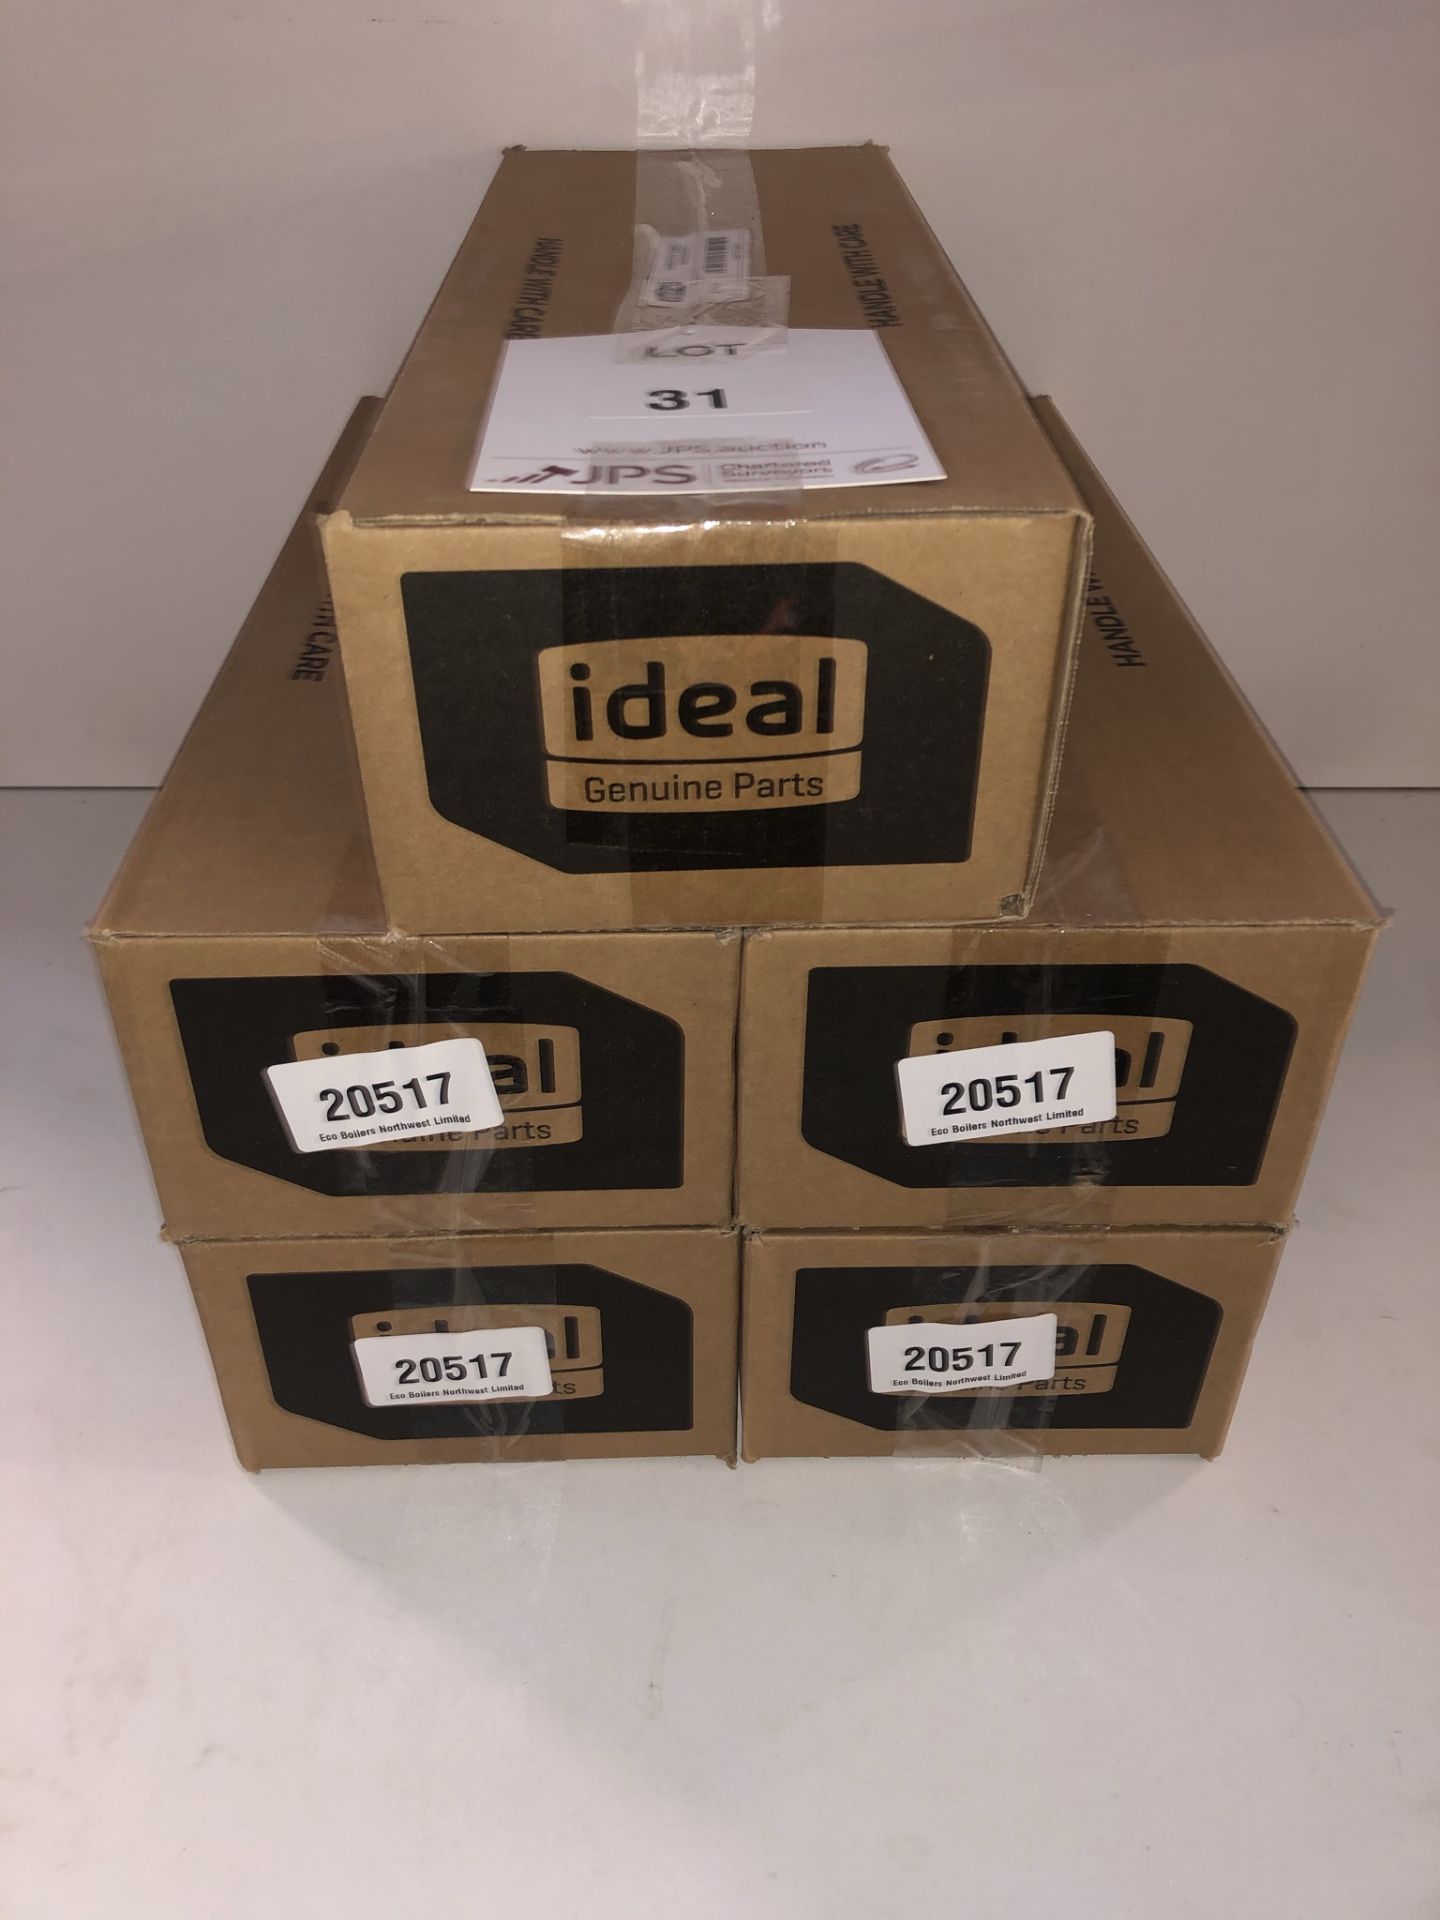 5 x Ideal 172626 Combustion Chamber Insulation Kits - Total RRP£265